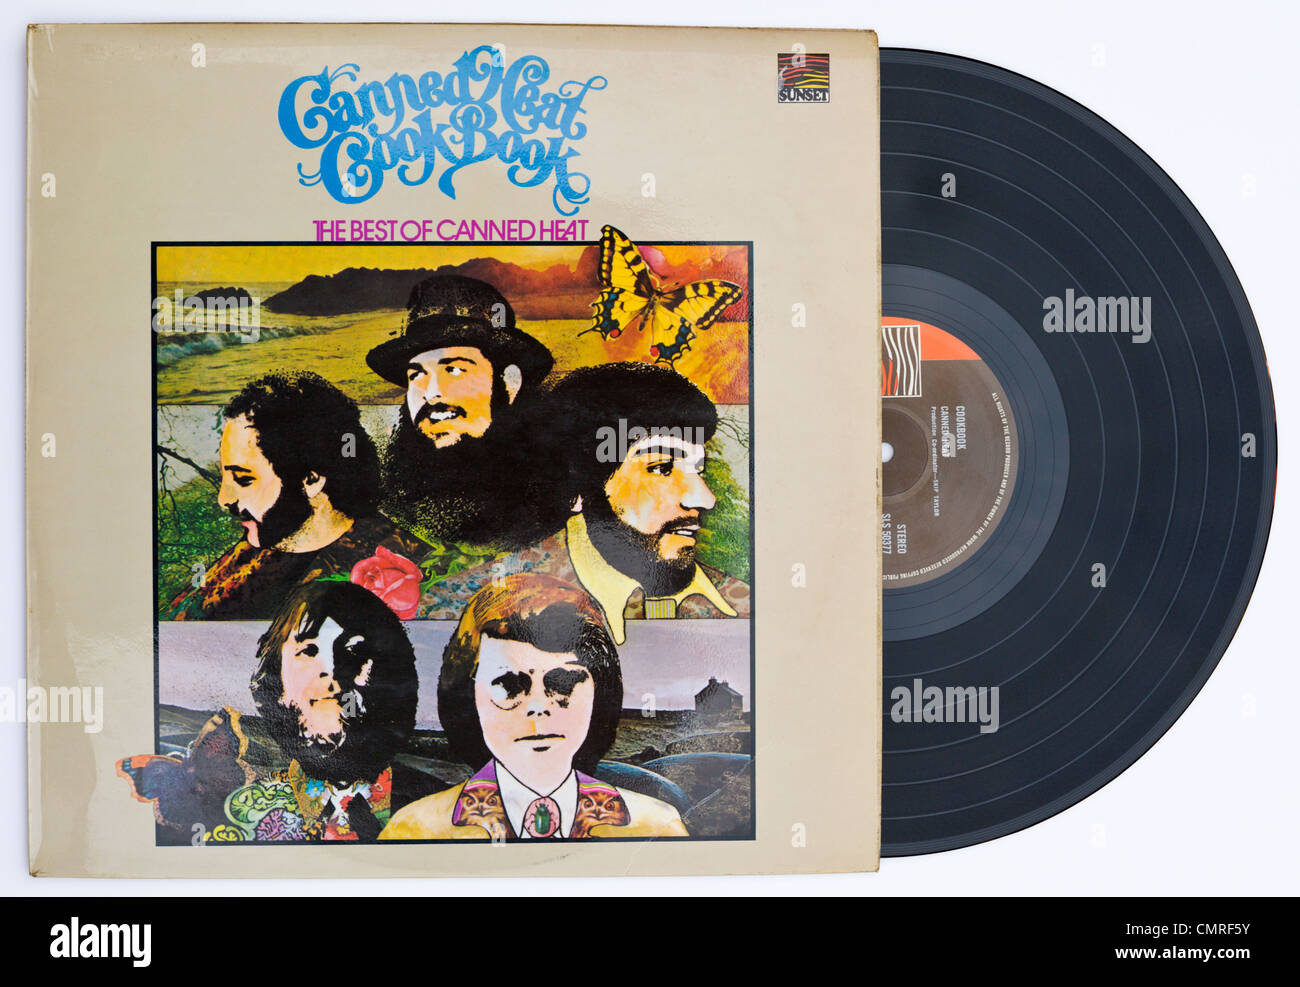 American rock band CANNED HEAT Cook Book Best of vinyl album cover released 1975 on SUNSET RECORDS label Stock Photo